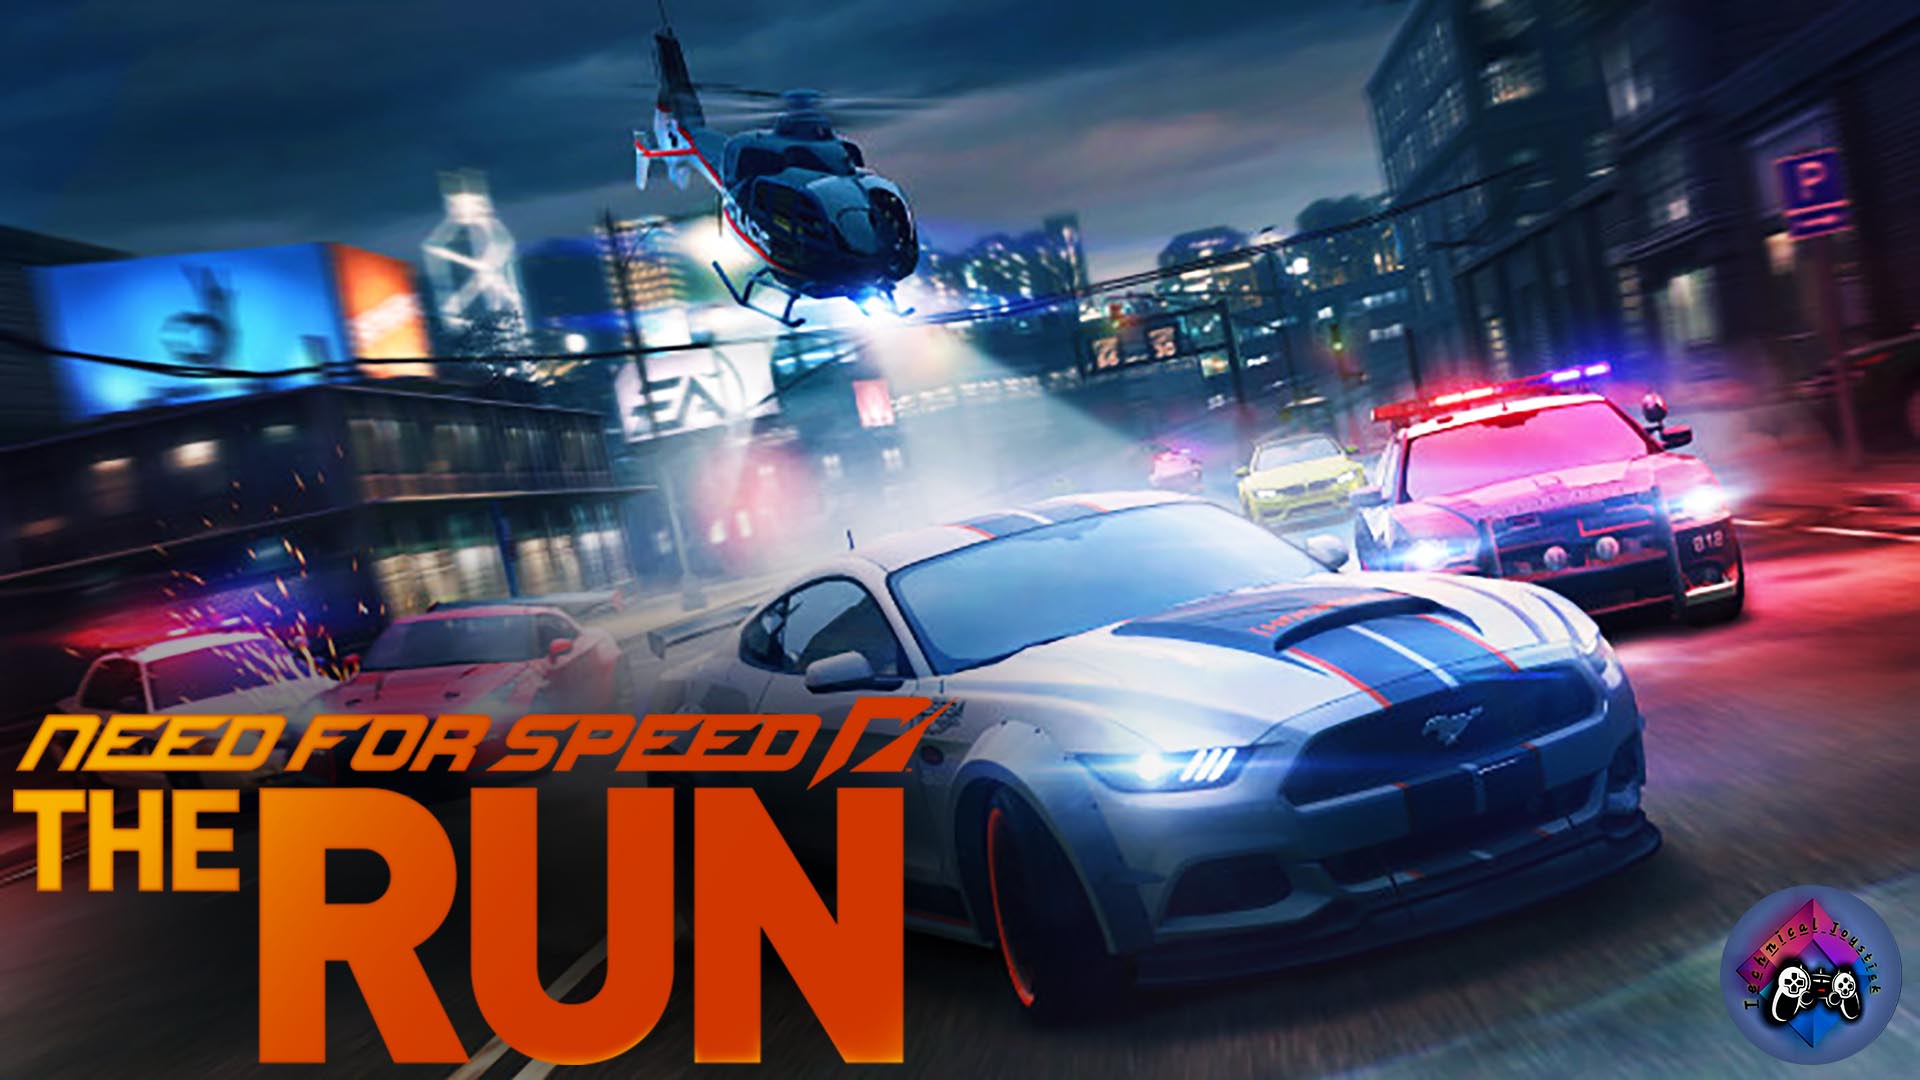 Need For Speed The Run Free Download PC Windows Game